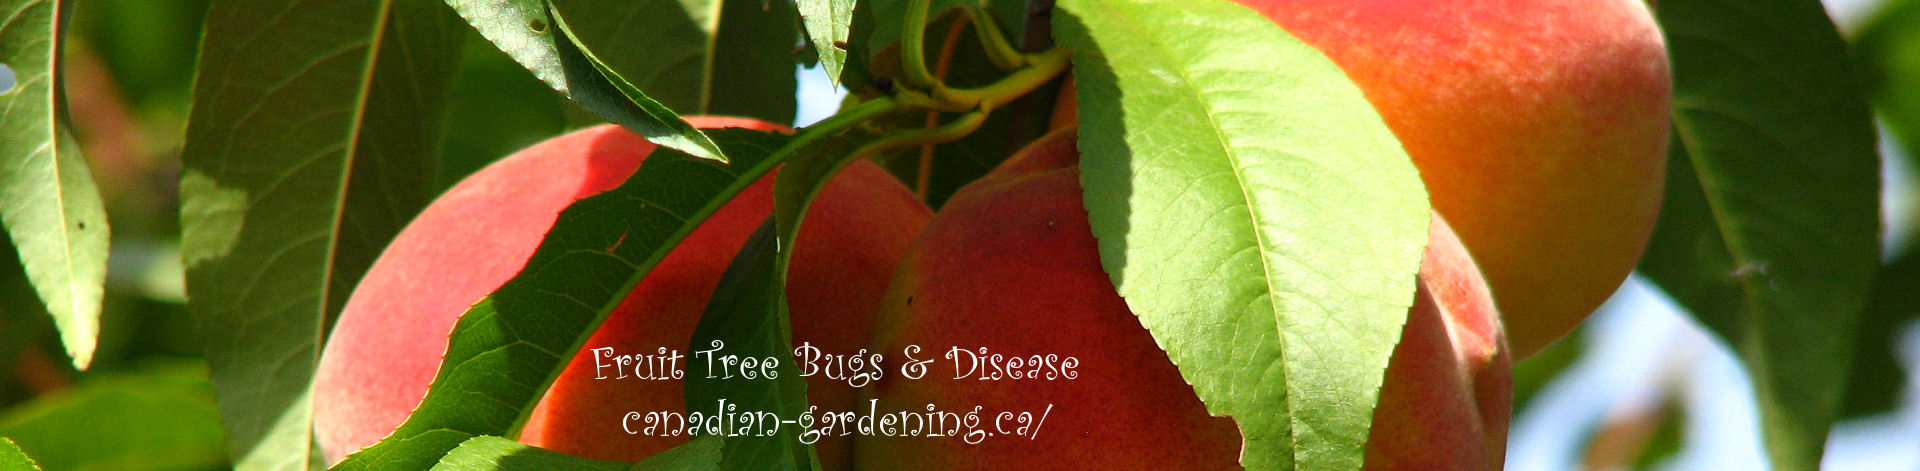 fruit tree bugs and diseases logo